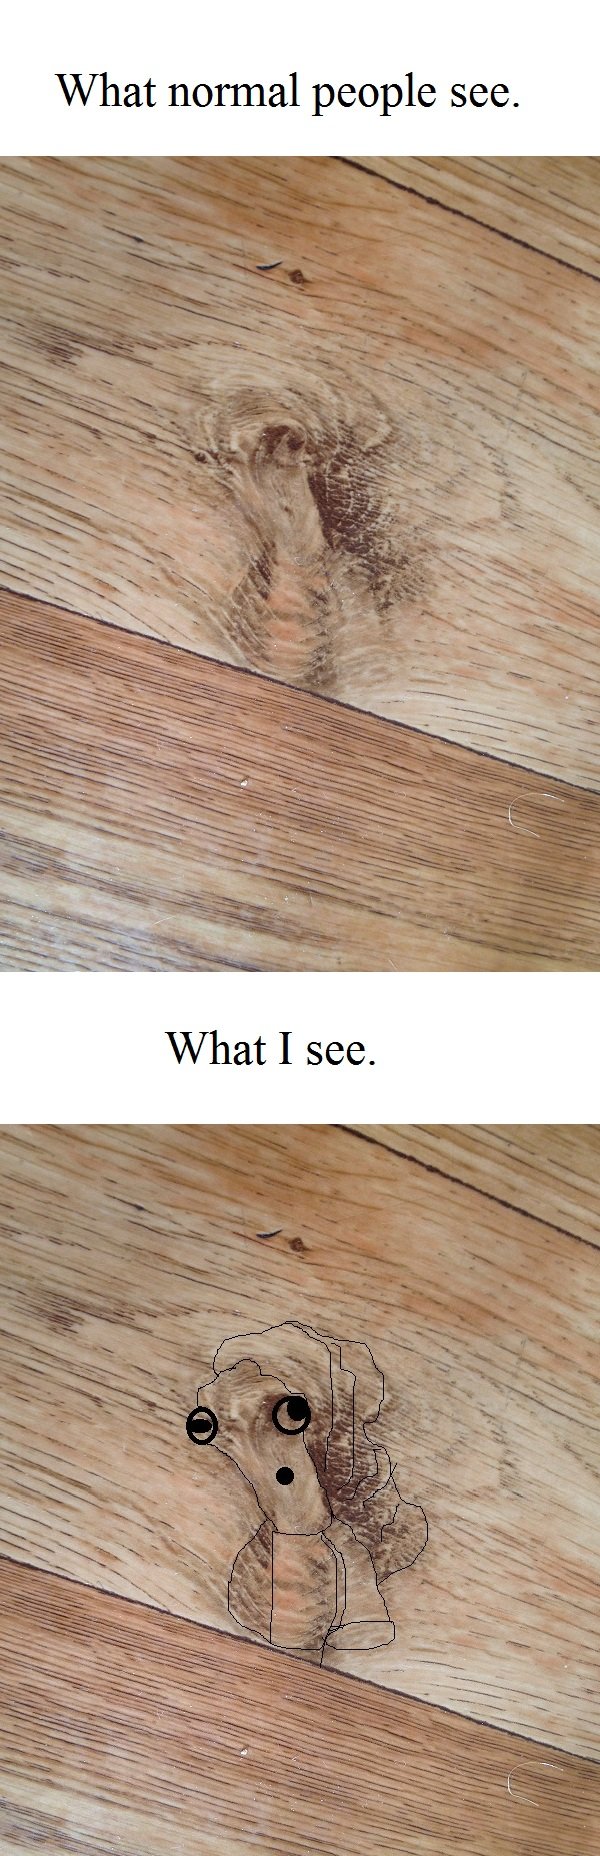 What people see. My go at OC. I took this of my gran's kitchen floor today.. normal people see. ll see.